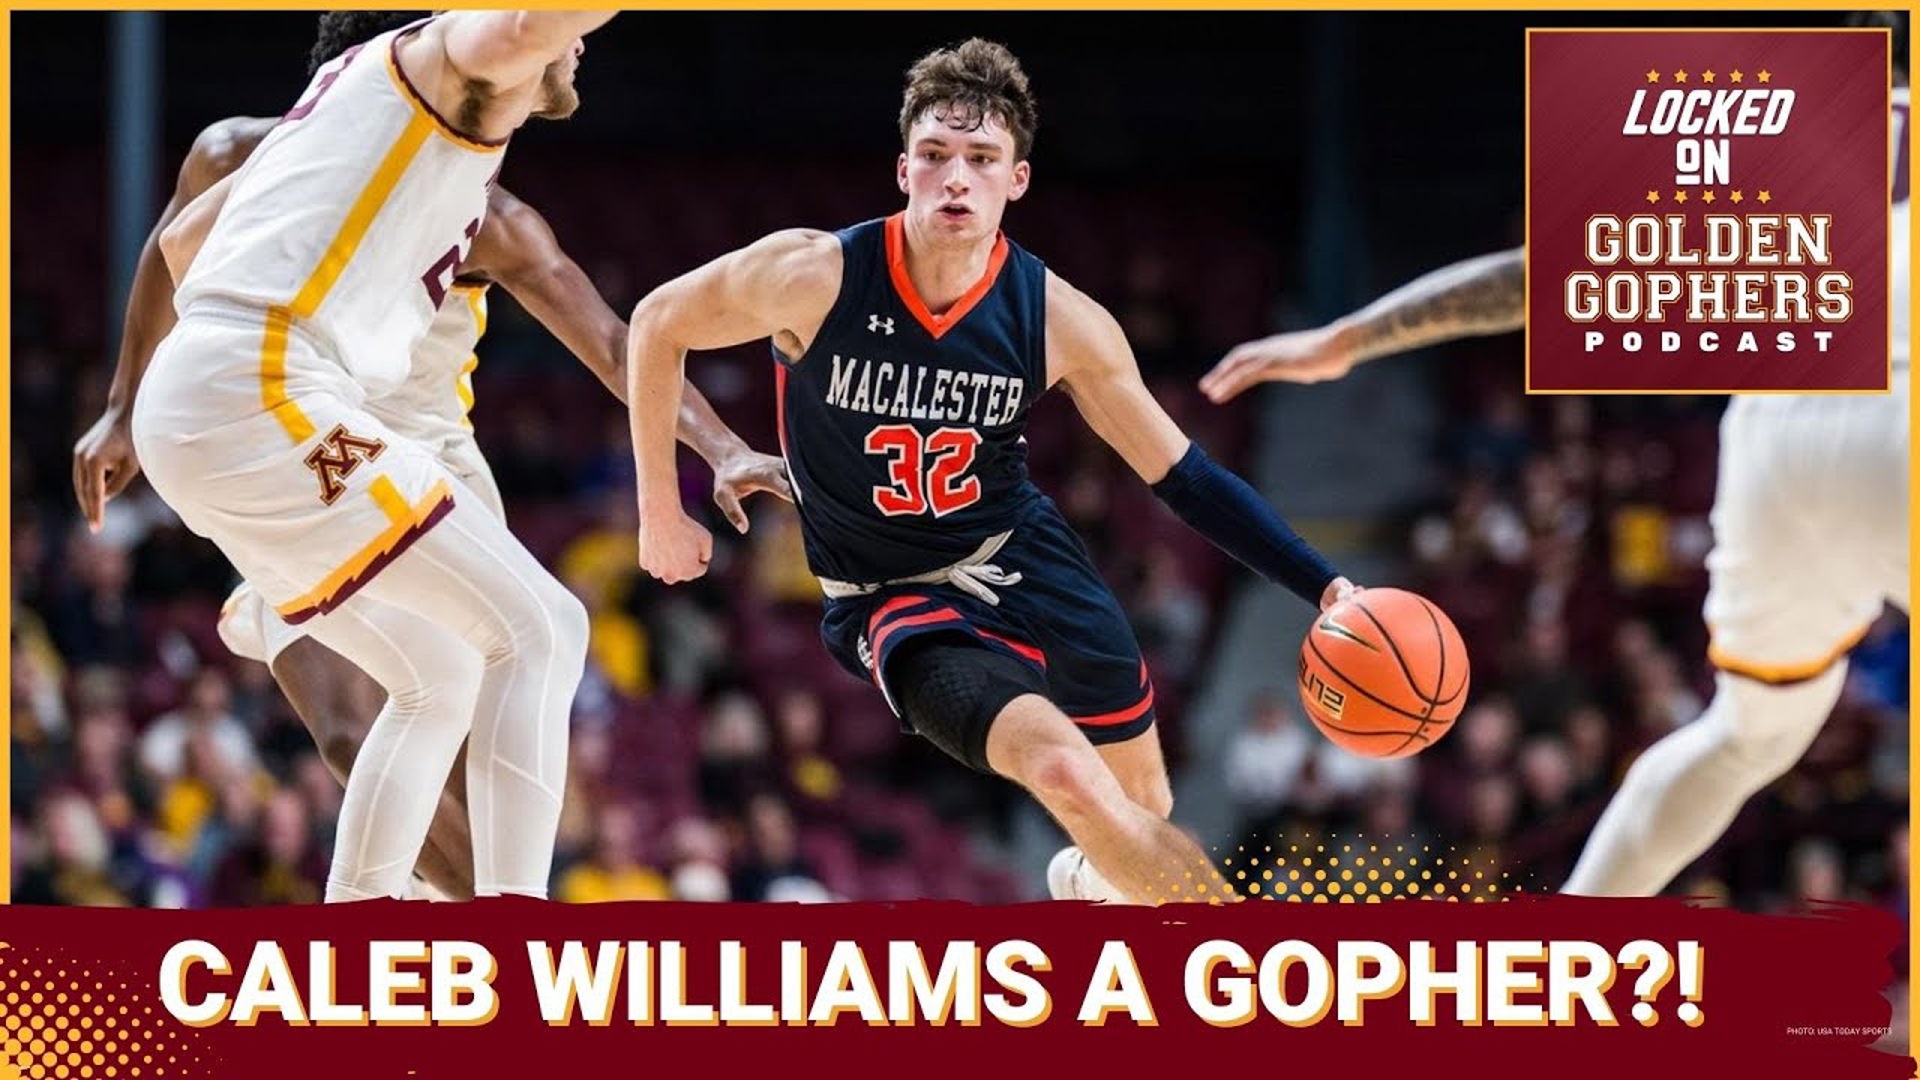 On today's Locked On Golden Gophers, host Kane Rob,  discusses how the Minnesota Gophers could be after Macalester hoops star Caleb Williams who gave them 41 points